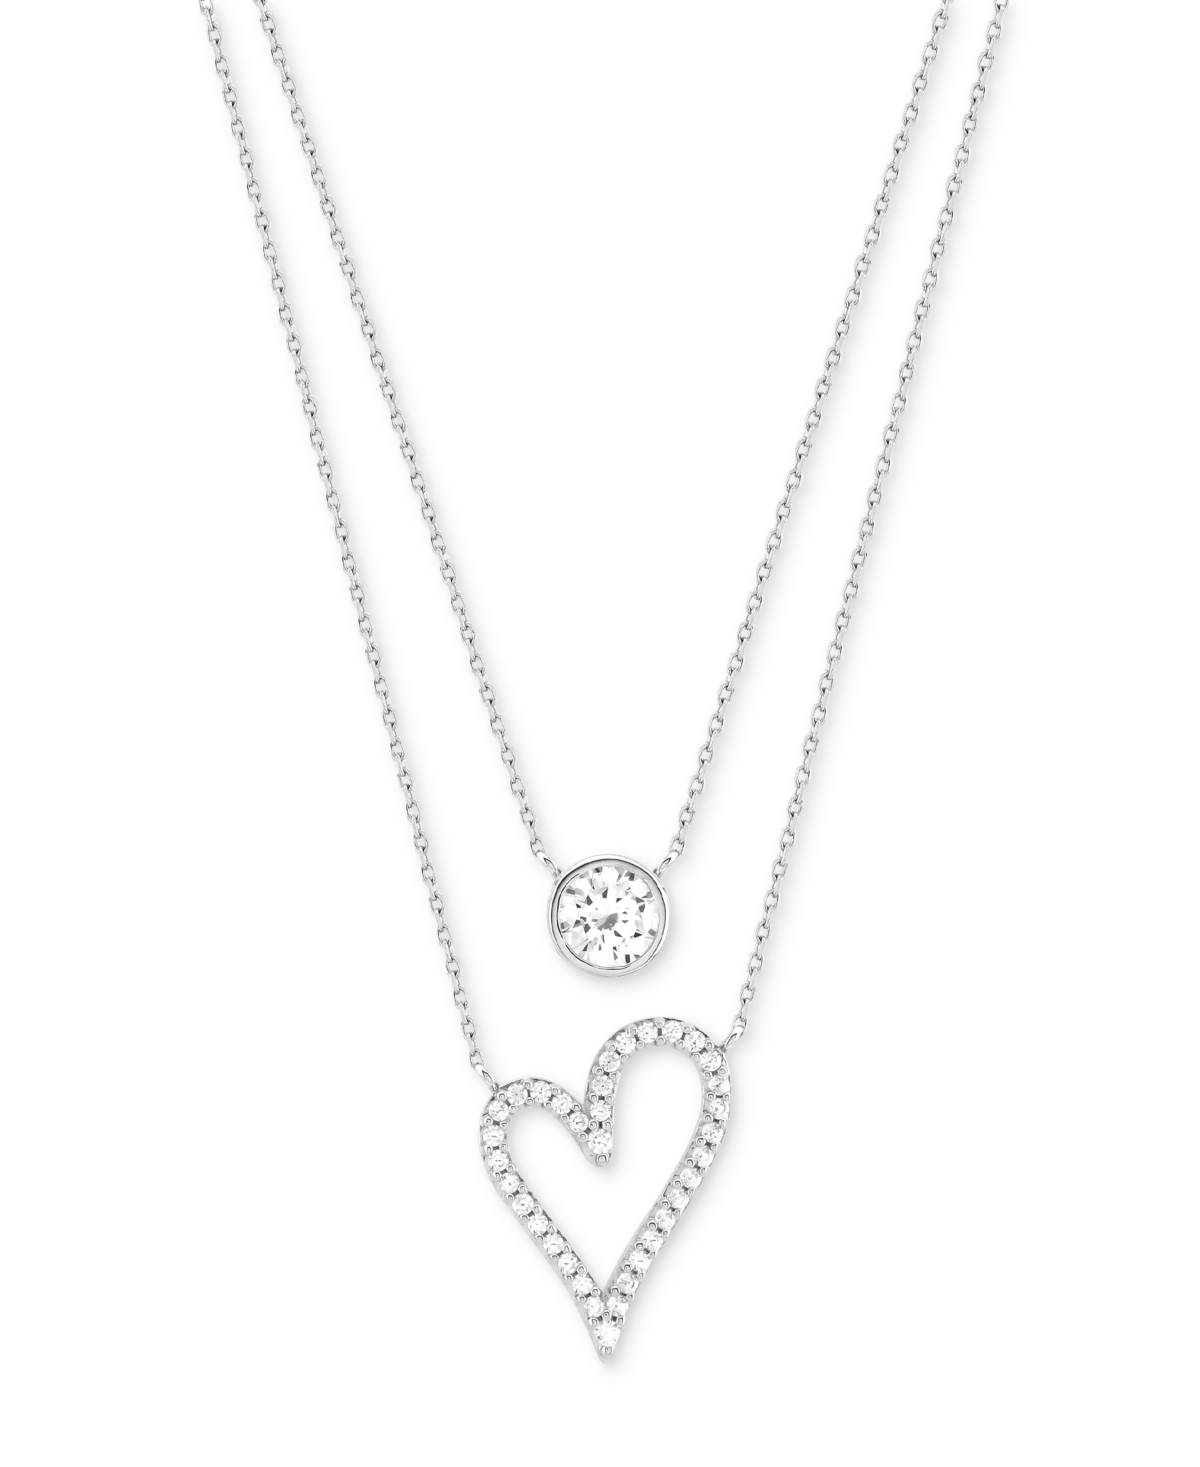 Cubic Zirconia Bezel & Heart Layered Necklace in Sterling Silver, 16" + 2" extender - Sterling Silver